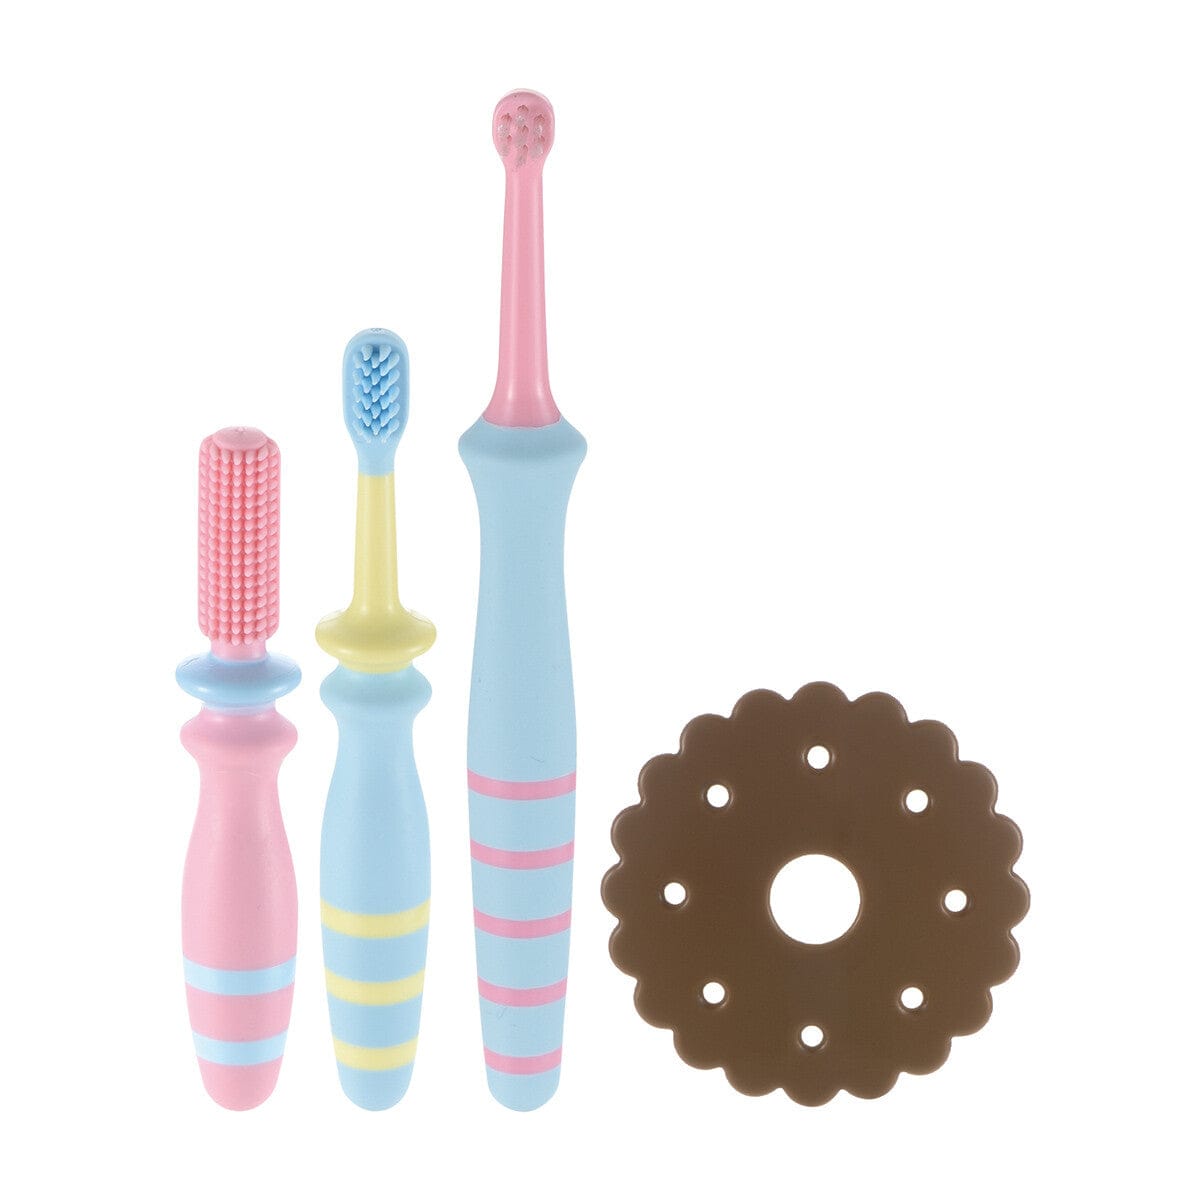 Richell - T.L.I Try Tabetara Baby Toothbrush Set for Front Teeth (4 Pieces)    Baby Toothbrush